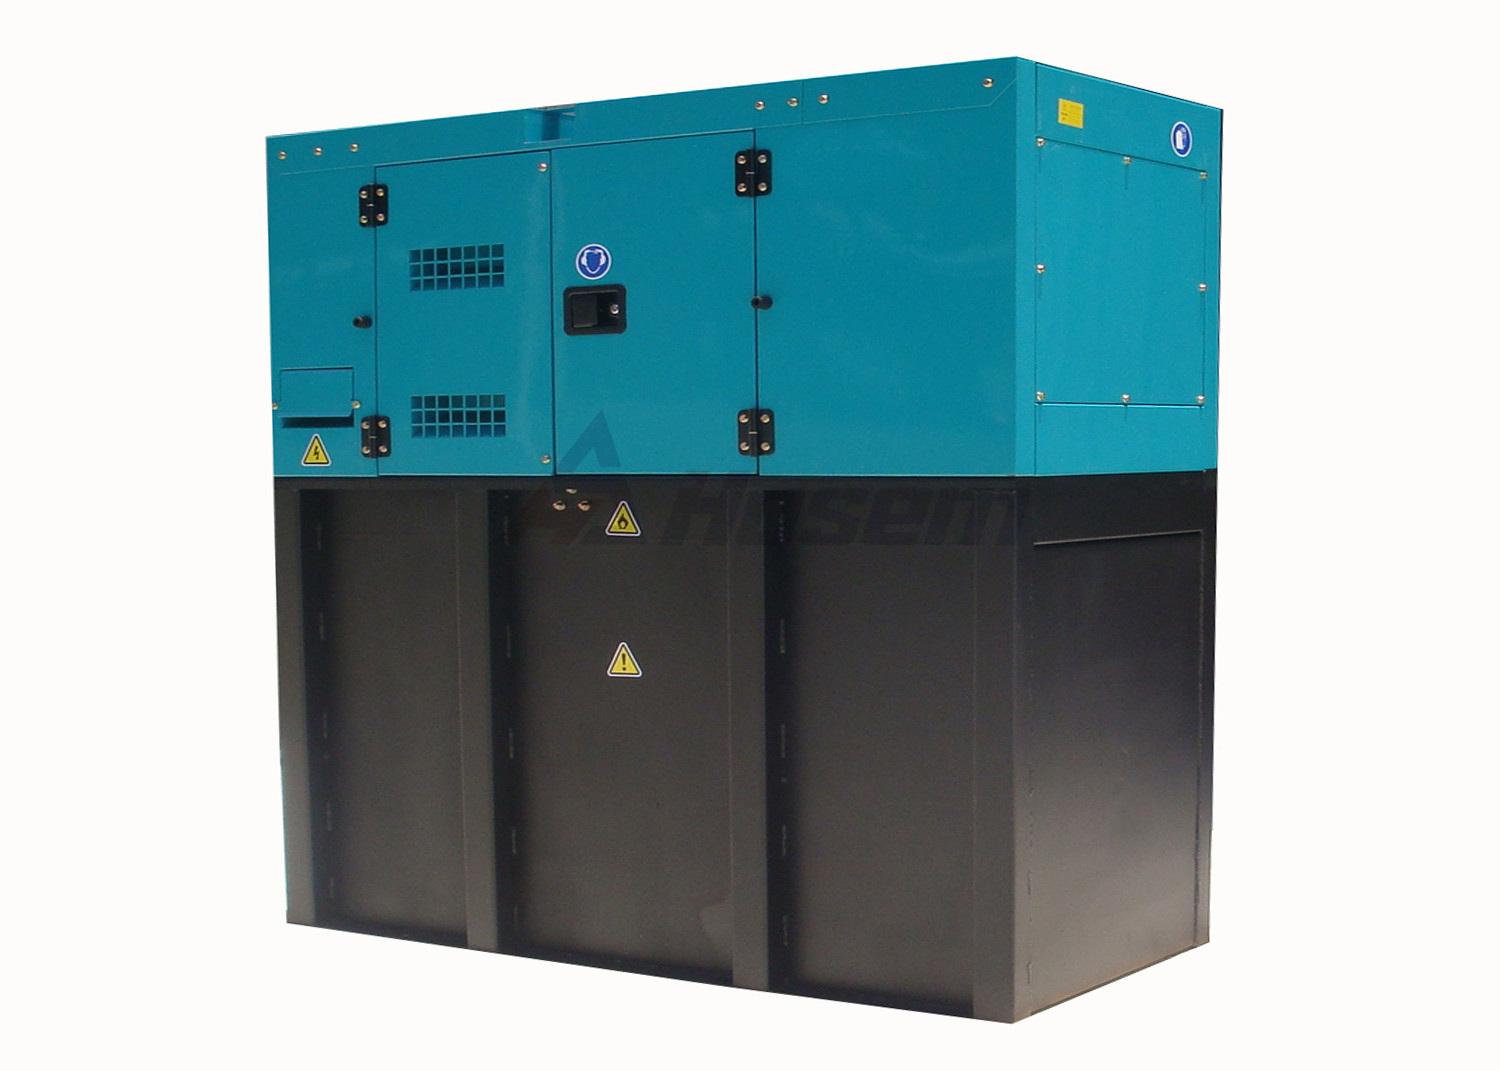  Standby 10kVA Diesel Generator Set with Quanchai Diesel Engine and Brushless Alternator